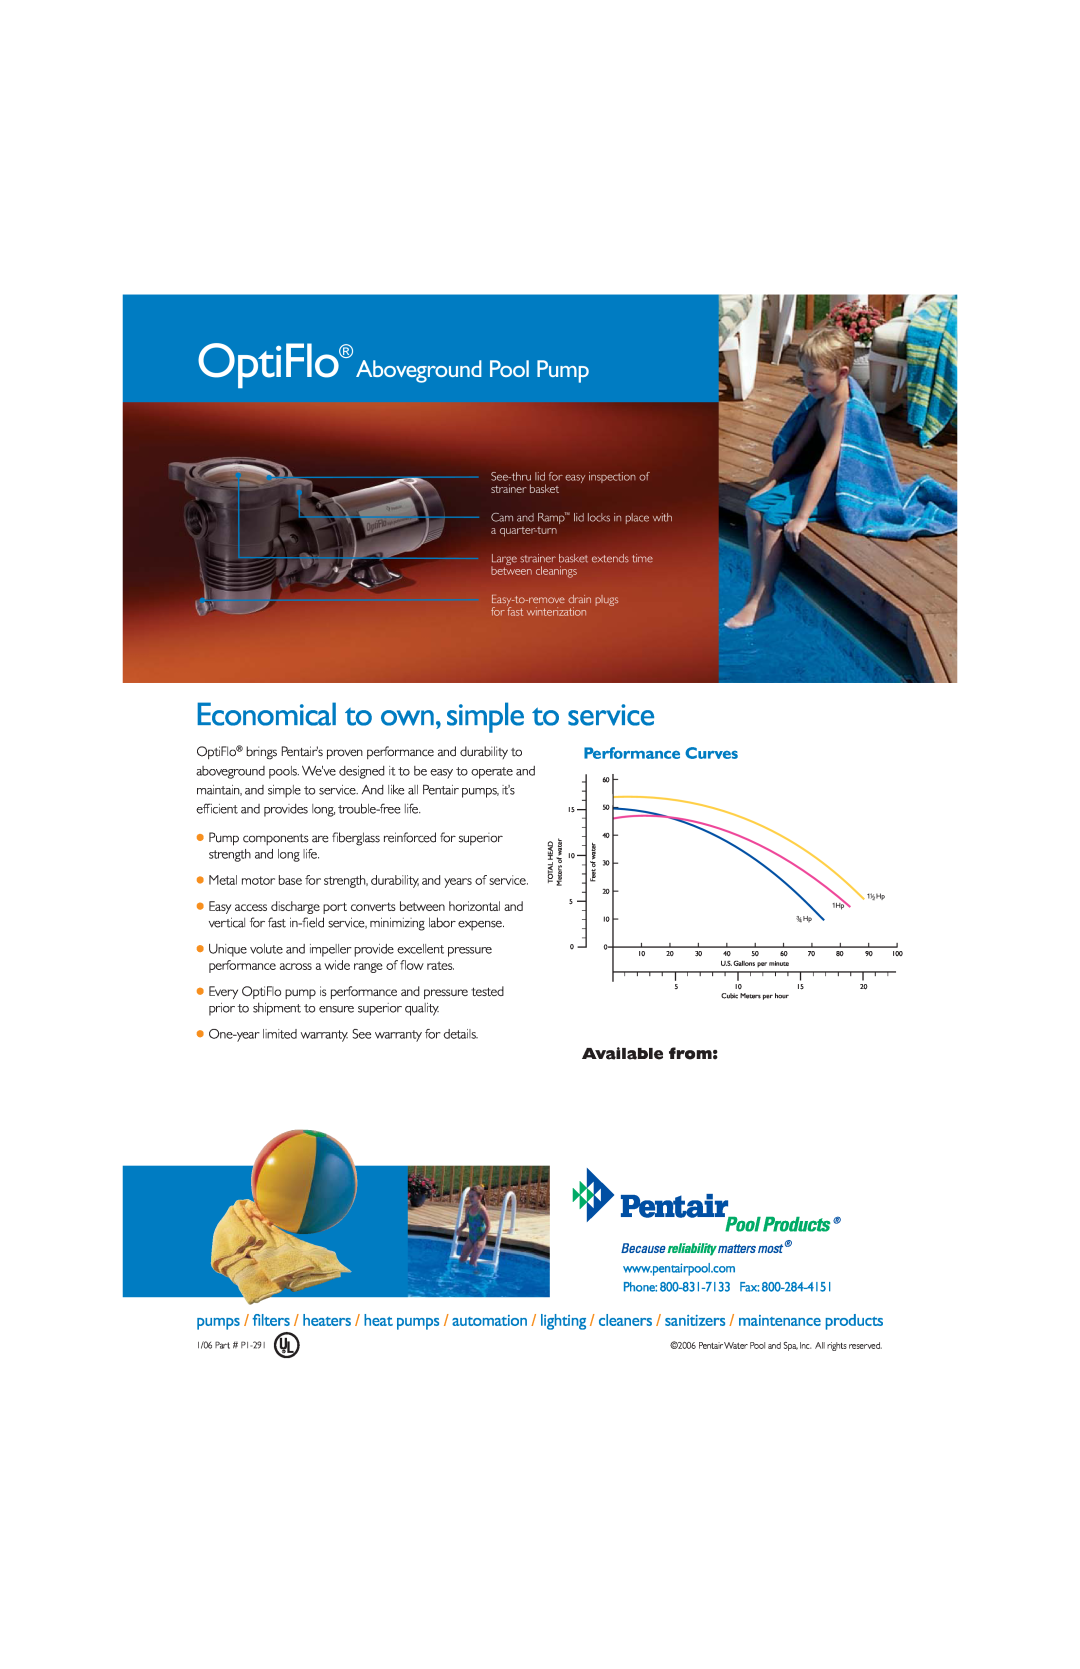 Pentair Economical to own, simple to service, OptiFlo Aboveground Pool Pump, strength and long life, Available from 